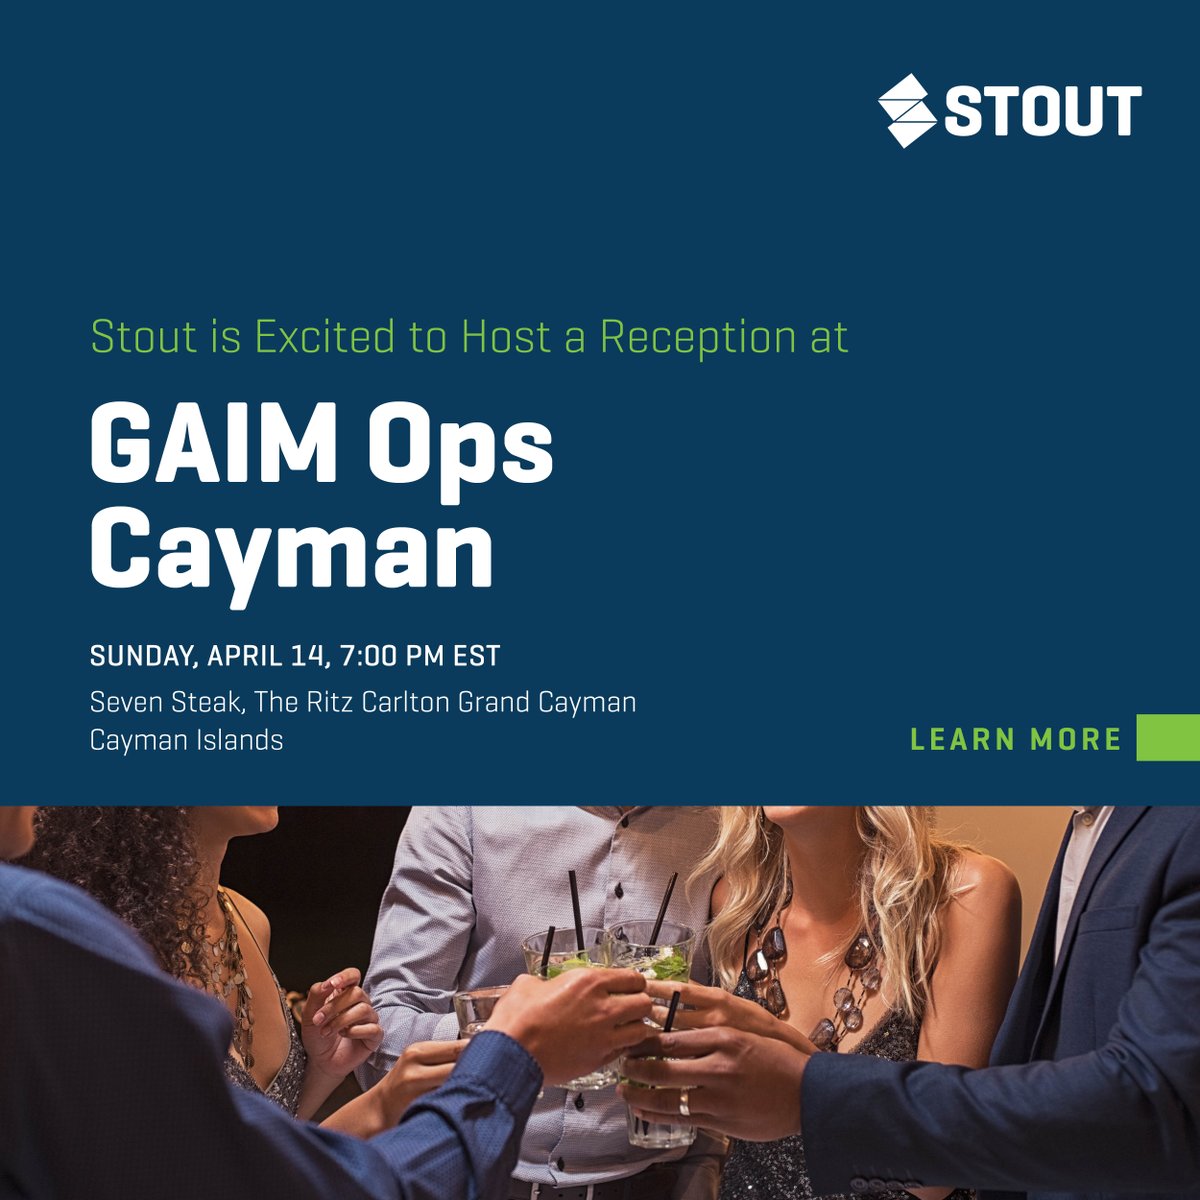 Register now for GAIM Ops Cayman and join Stout's exclusive reception with Managing Directors Harris Antoniades, Joel Cohen, Chris Franzek, and Boris Vaysburd. Learn more: bit.ly/3SXQhvV